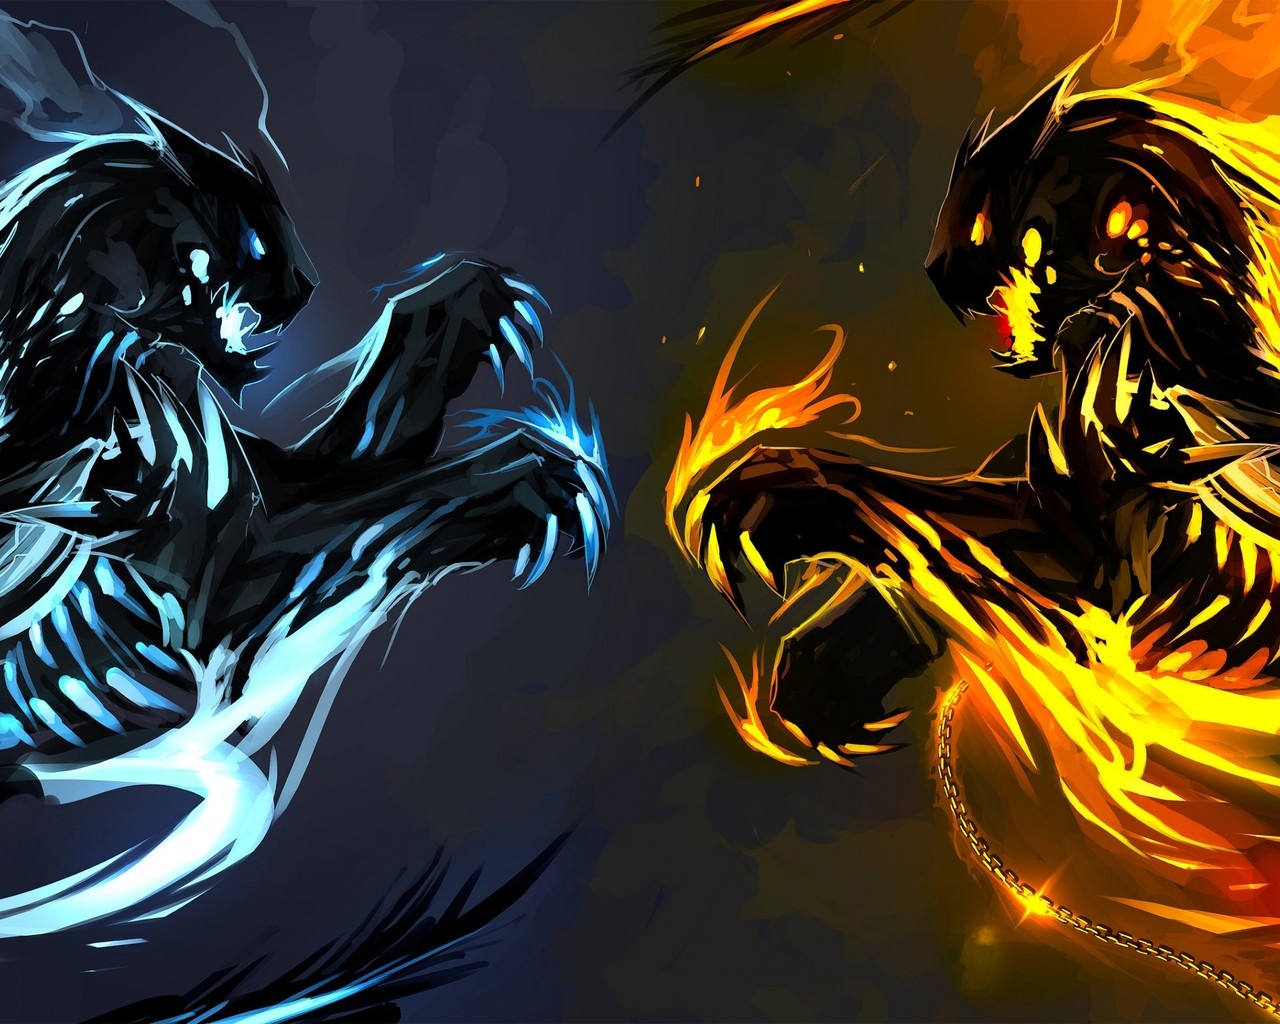 Ice and Fire Dragons for 1280 x 1024 resolution